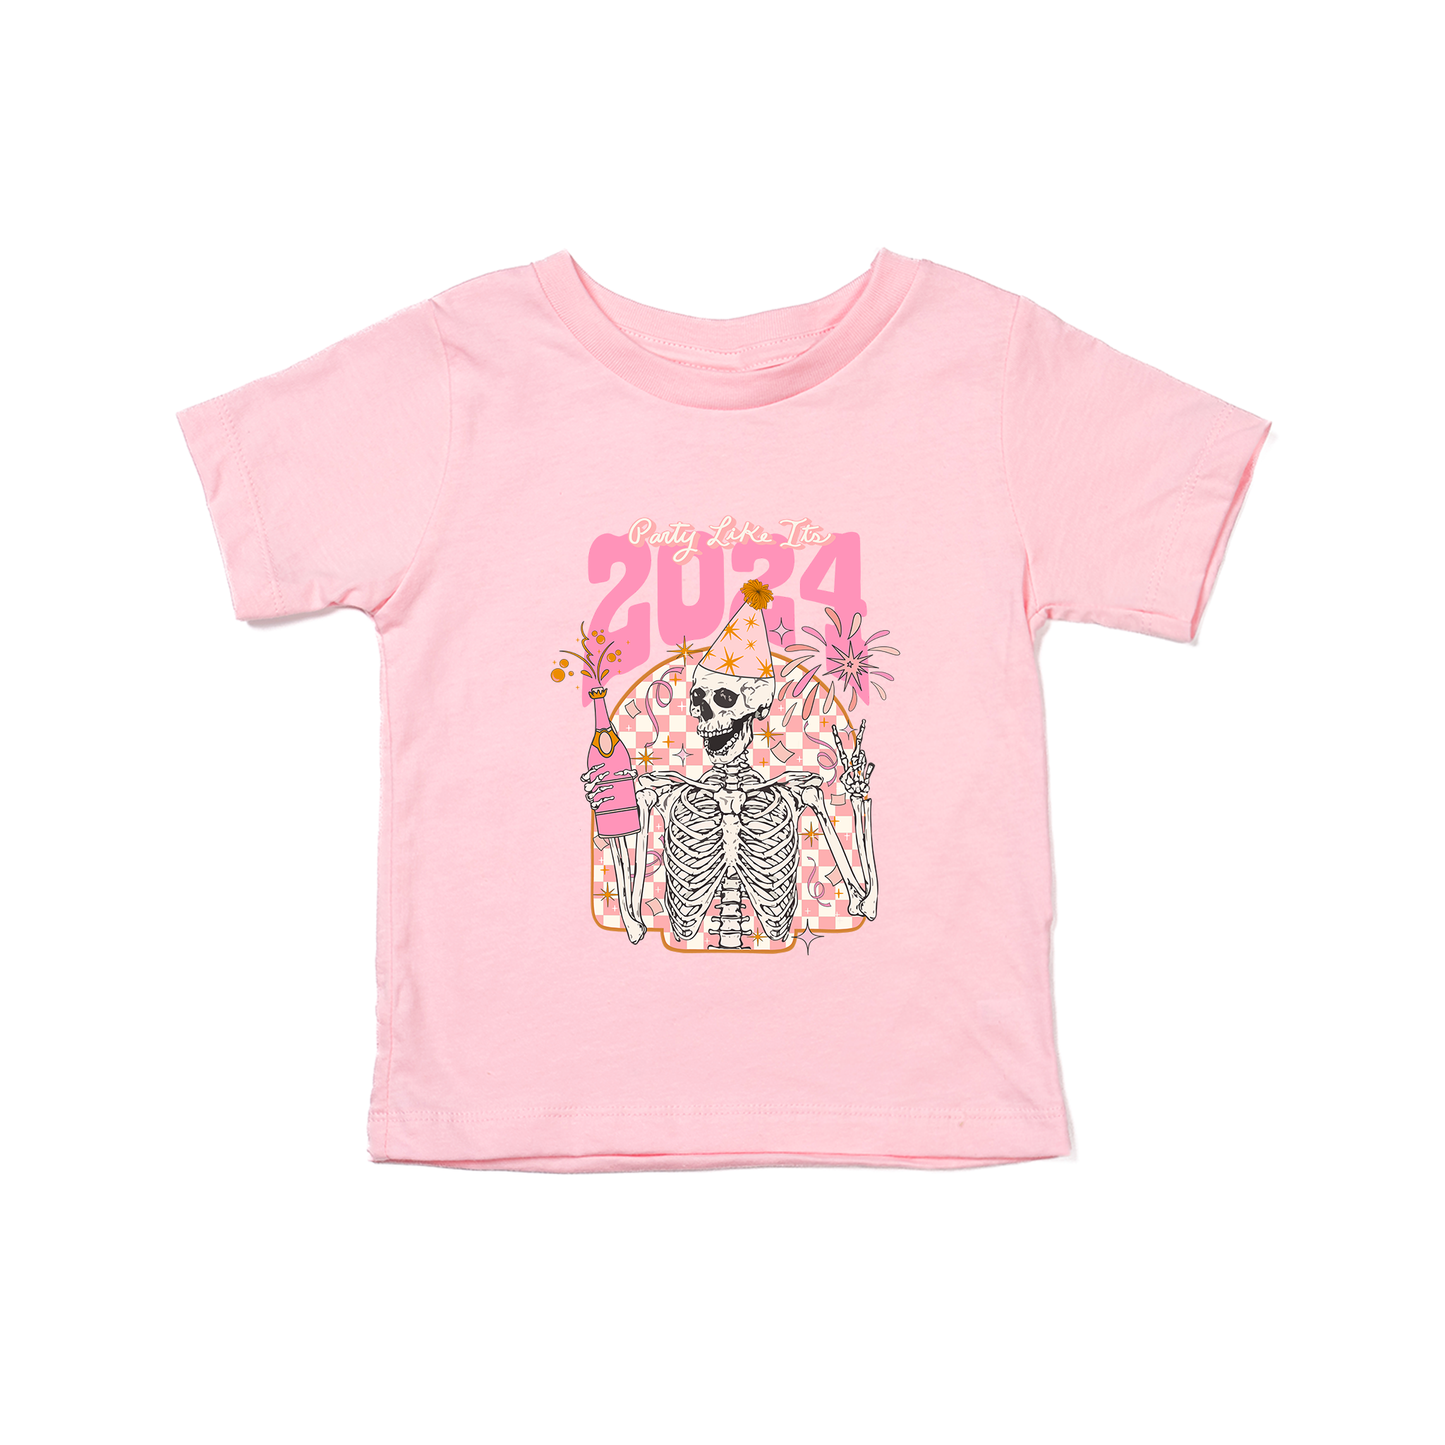 Party like it's 2024 - Kids Tee (Pink)